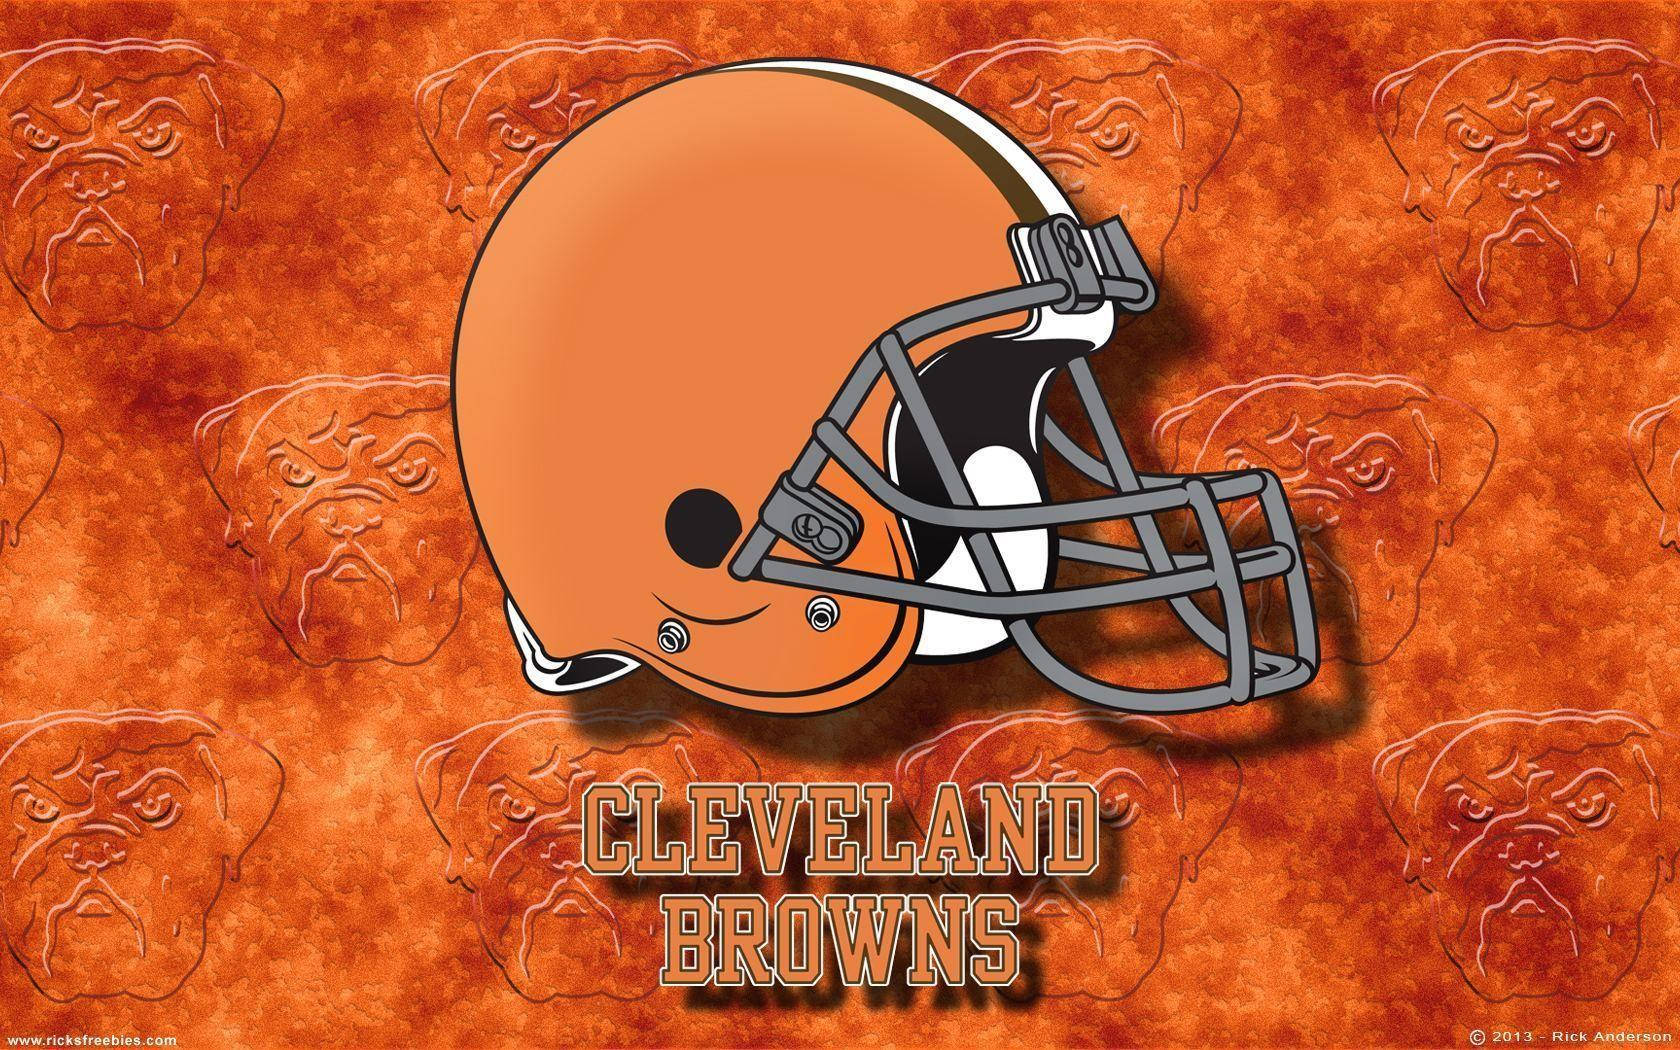 American Football Team Cleveland Browns Background